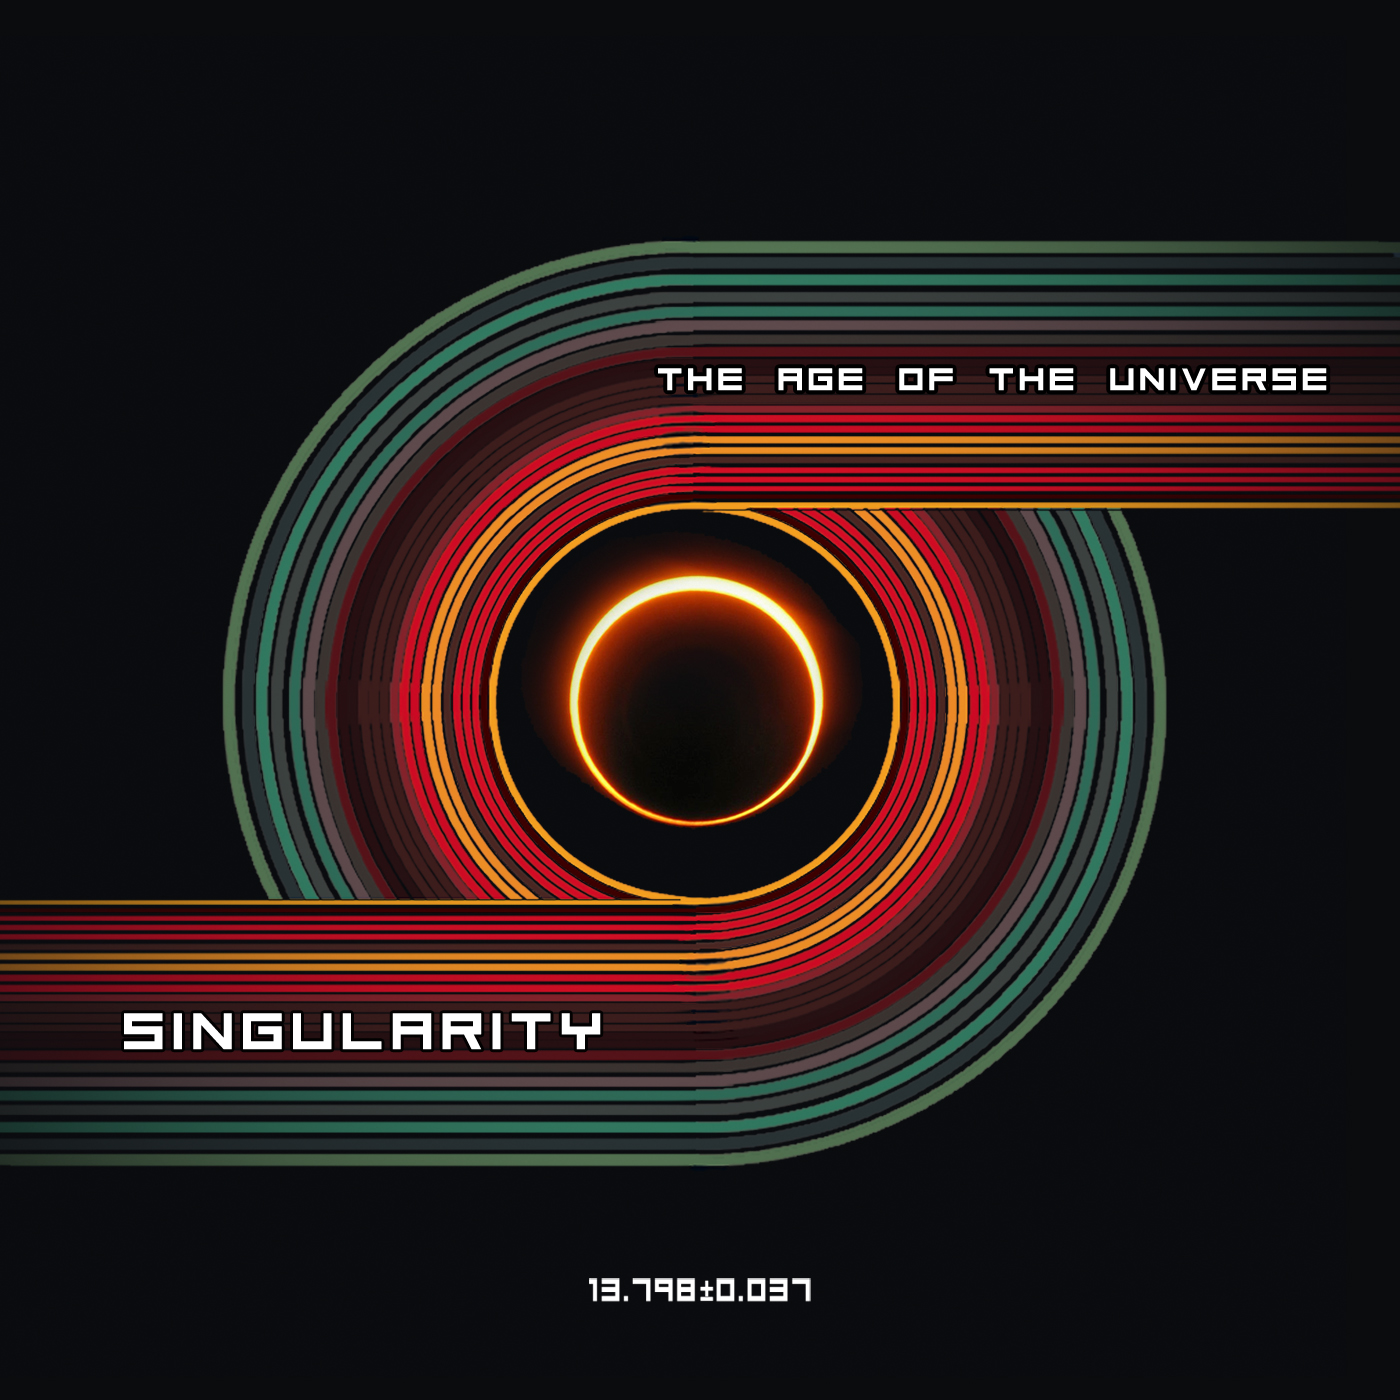 Tastes Like Rock - The Age of The Universe - Singularity Review